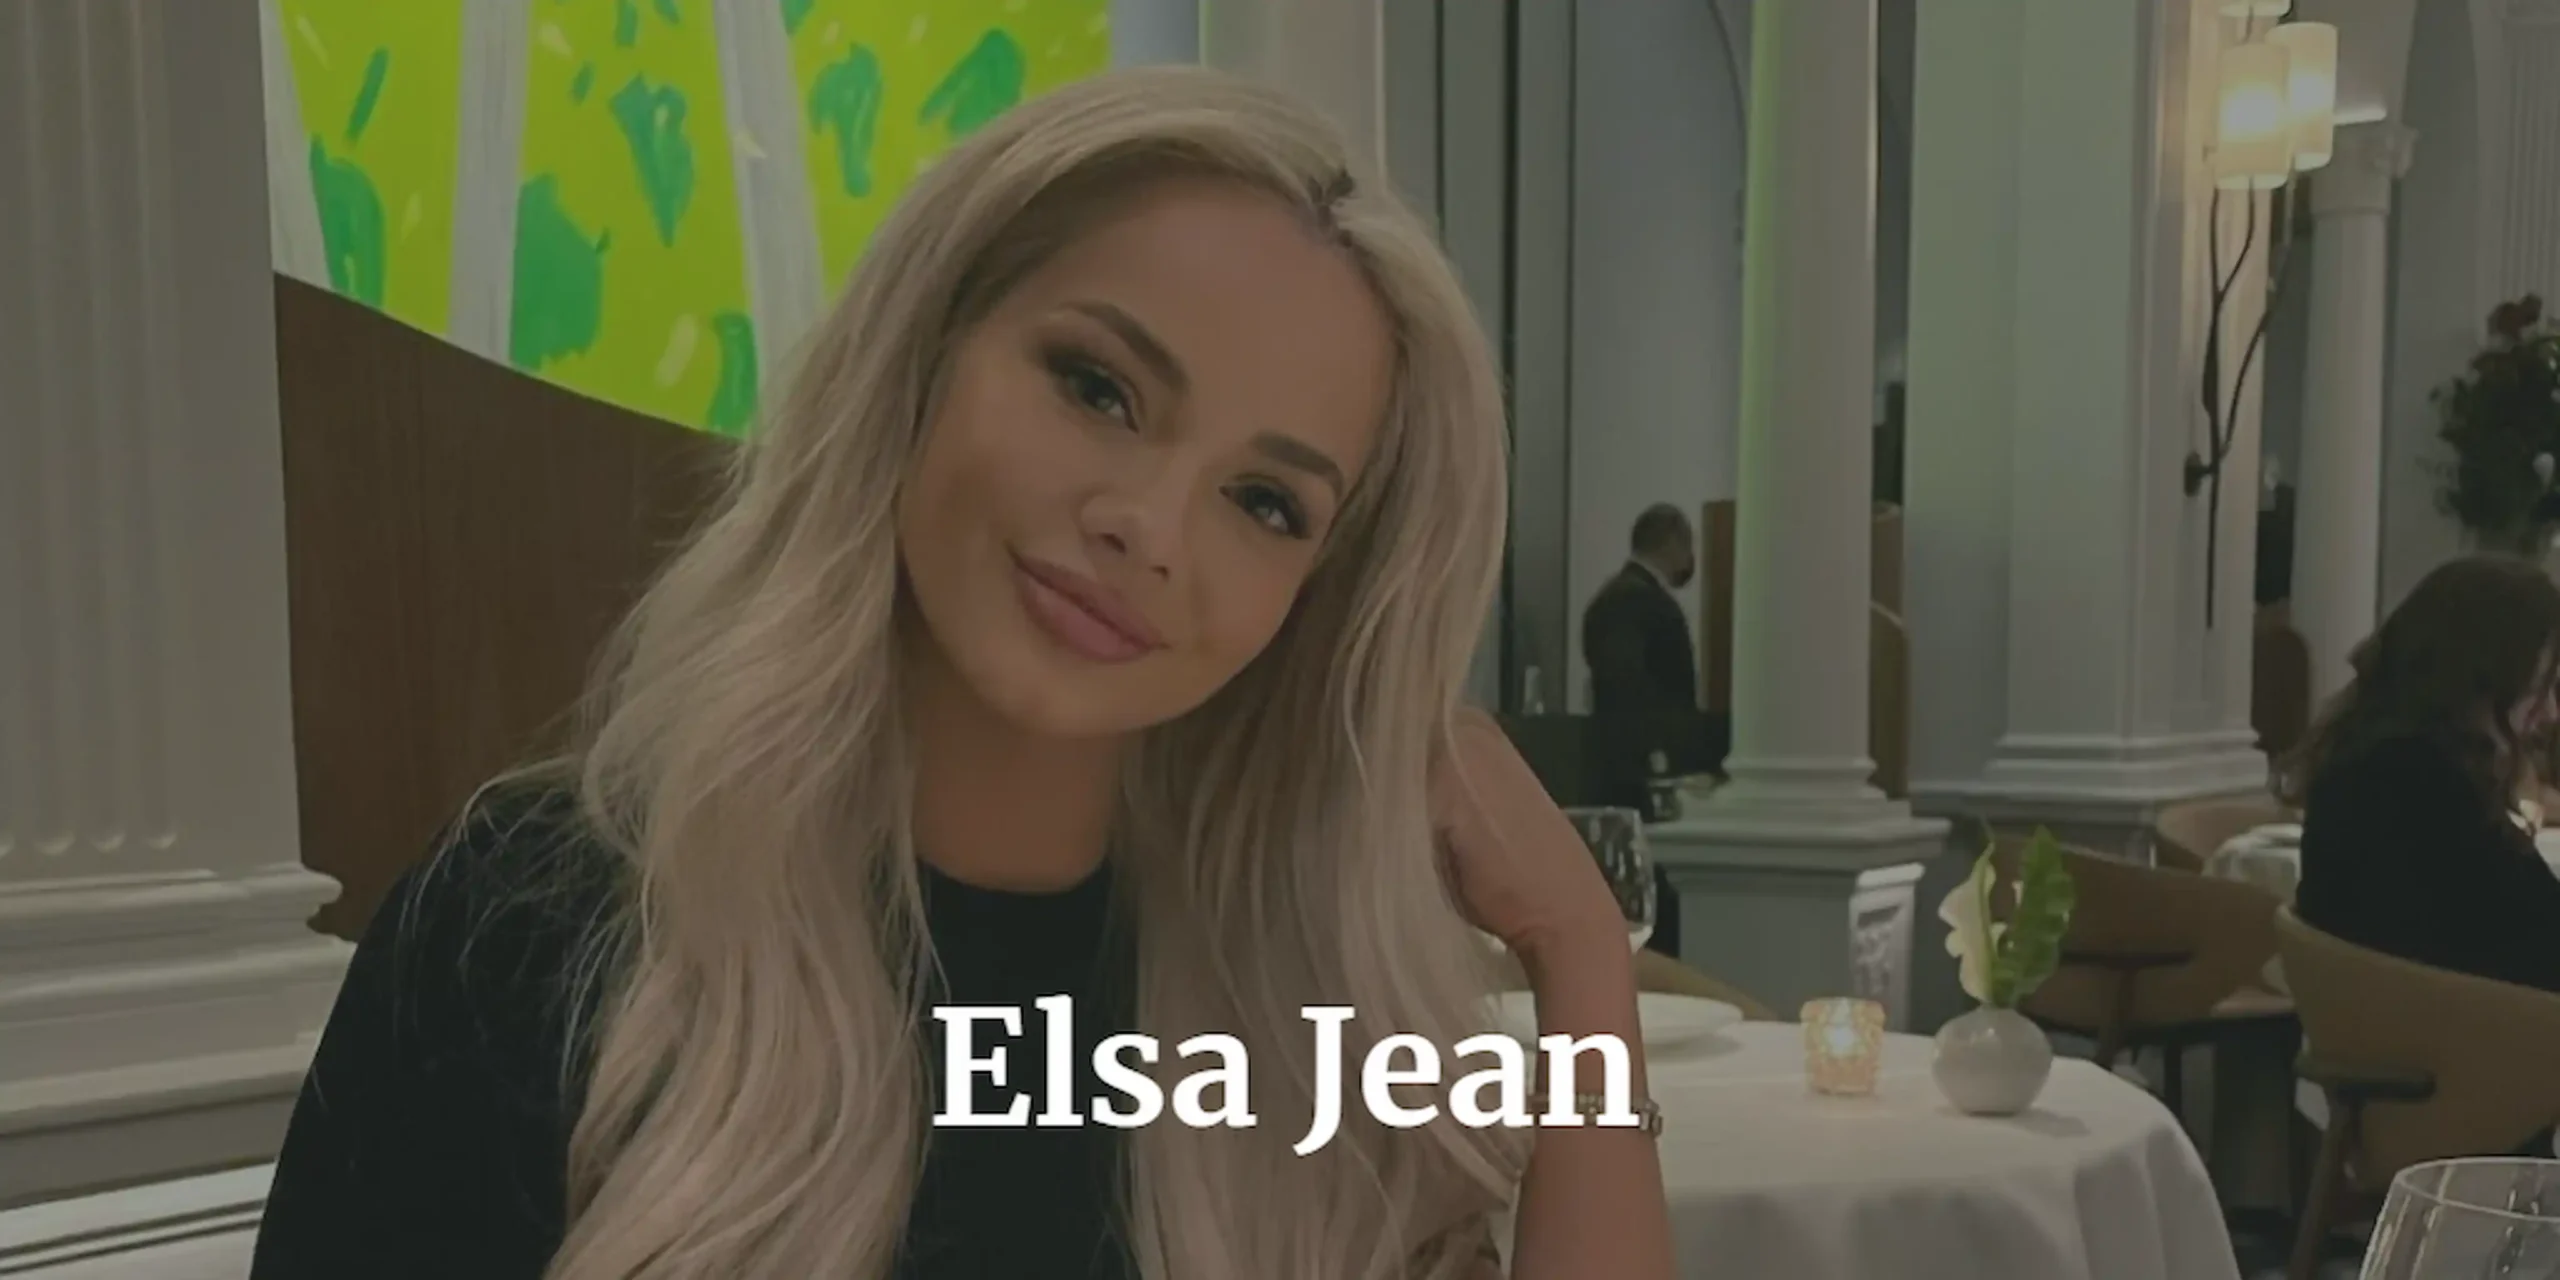 bill mefford recommends elsa jean real name pic